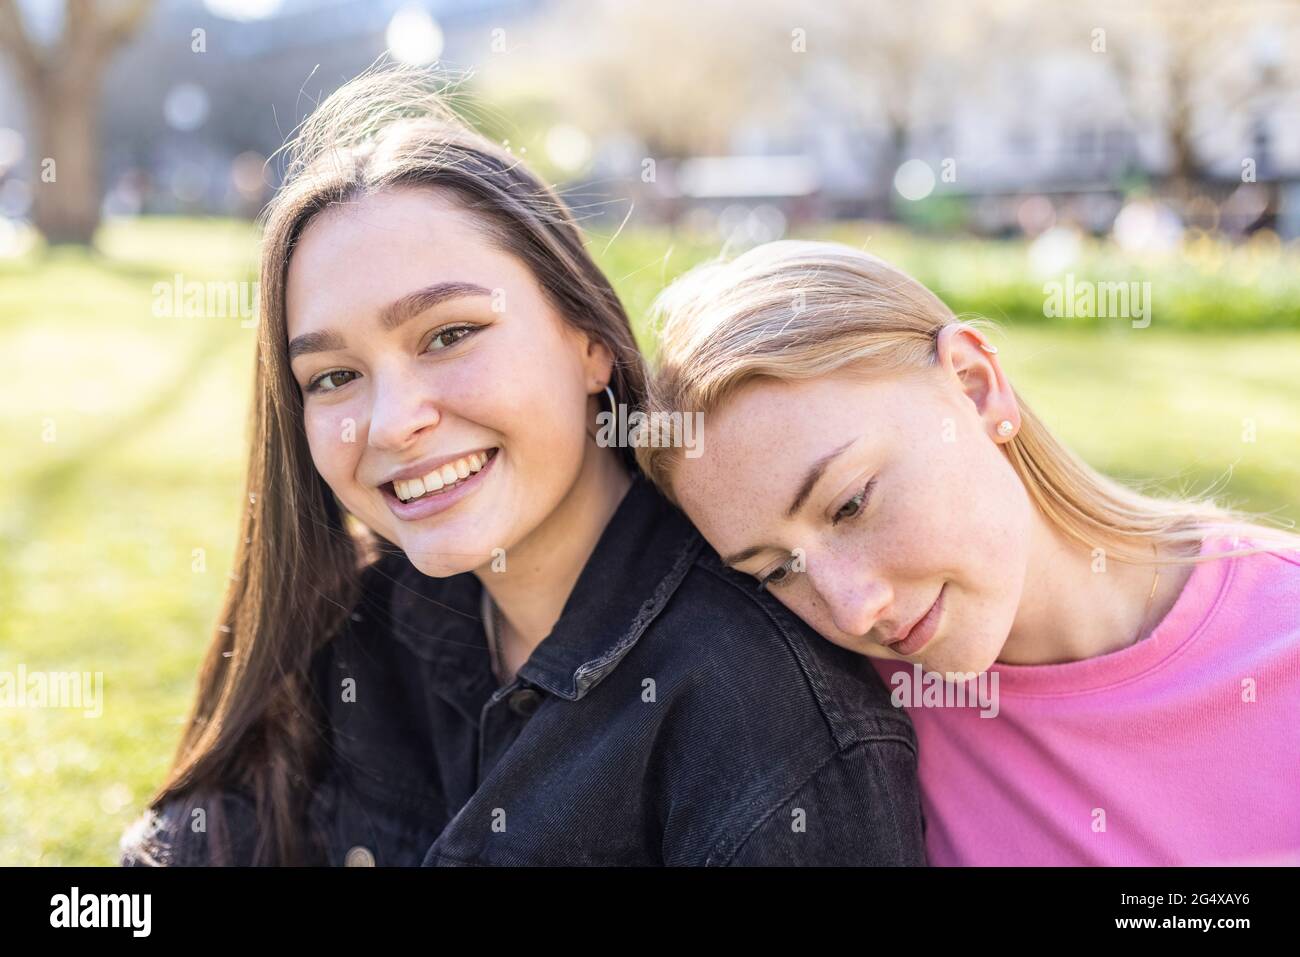 Young woman with head on shoulder of female friend at park Stock Photo